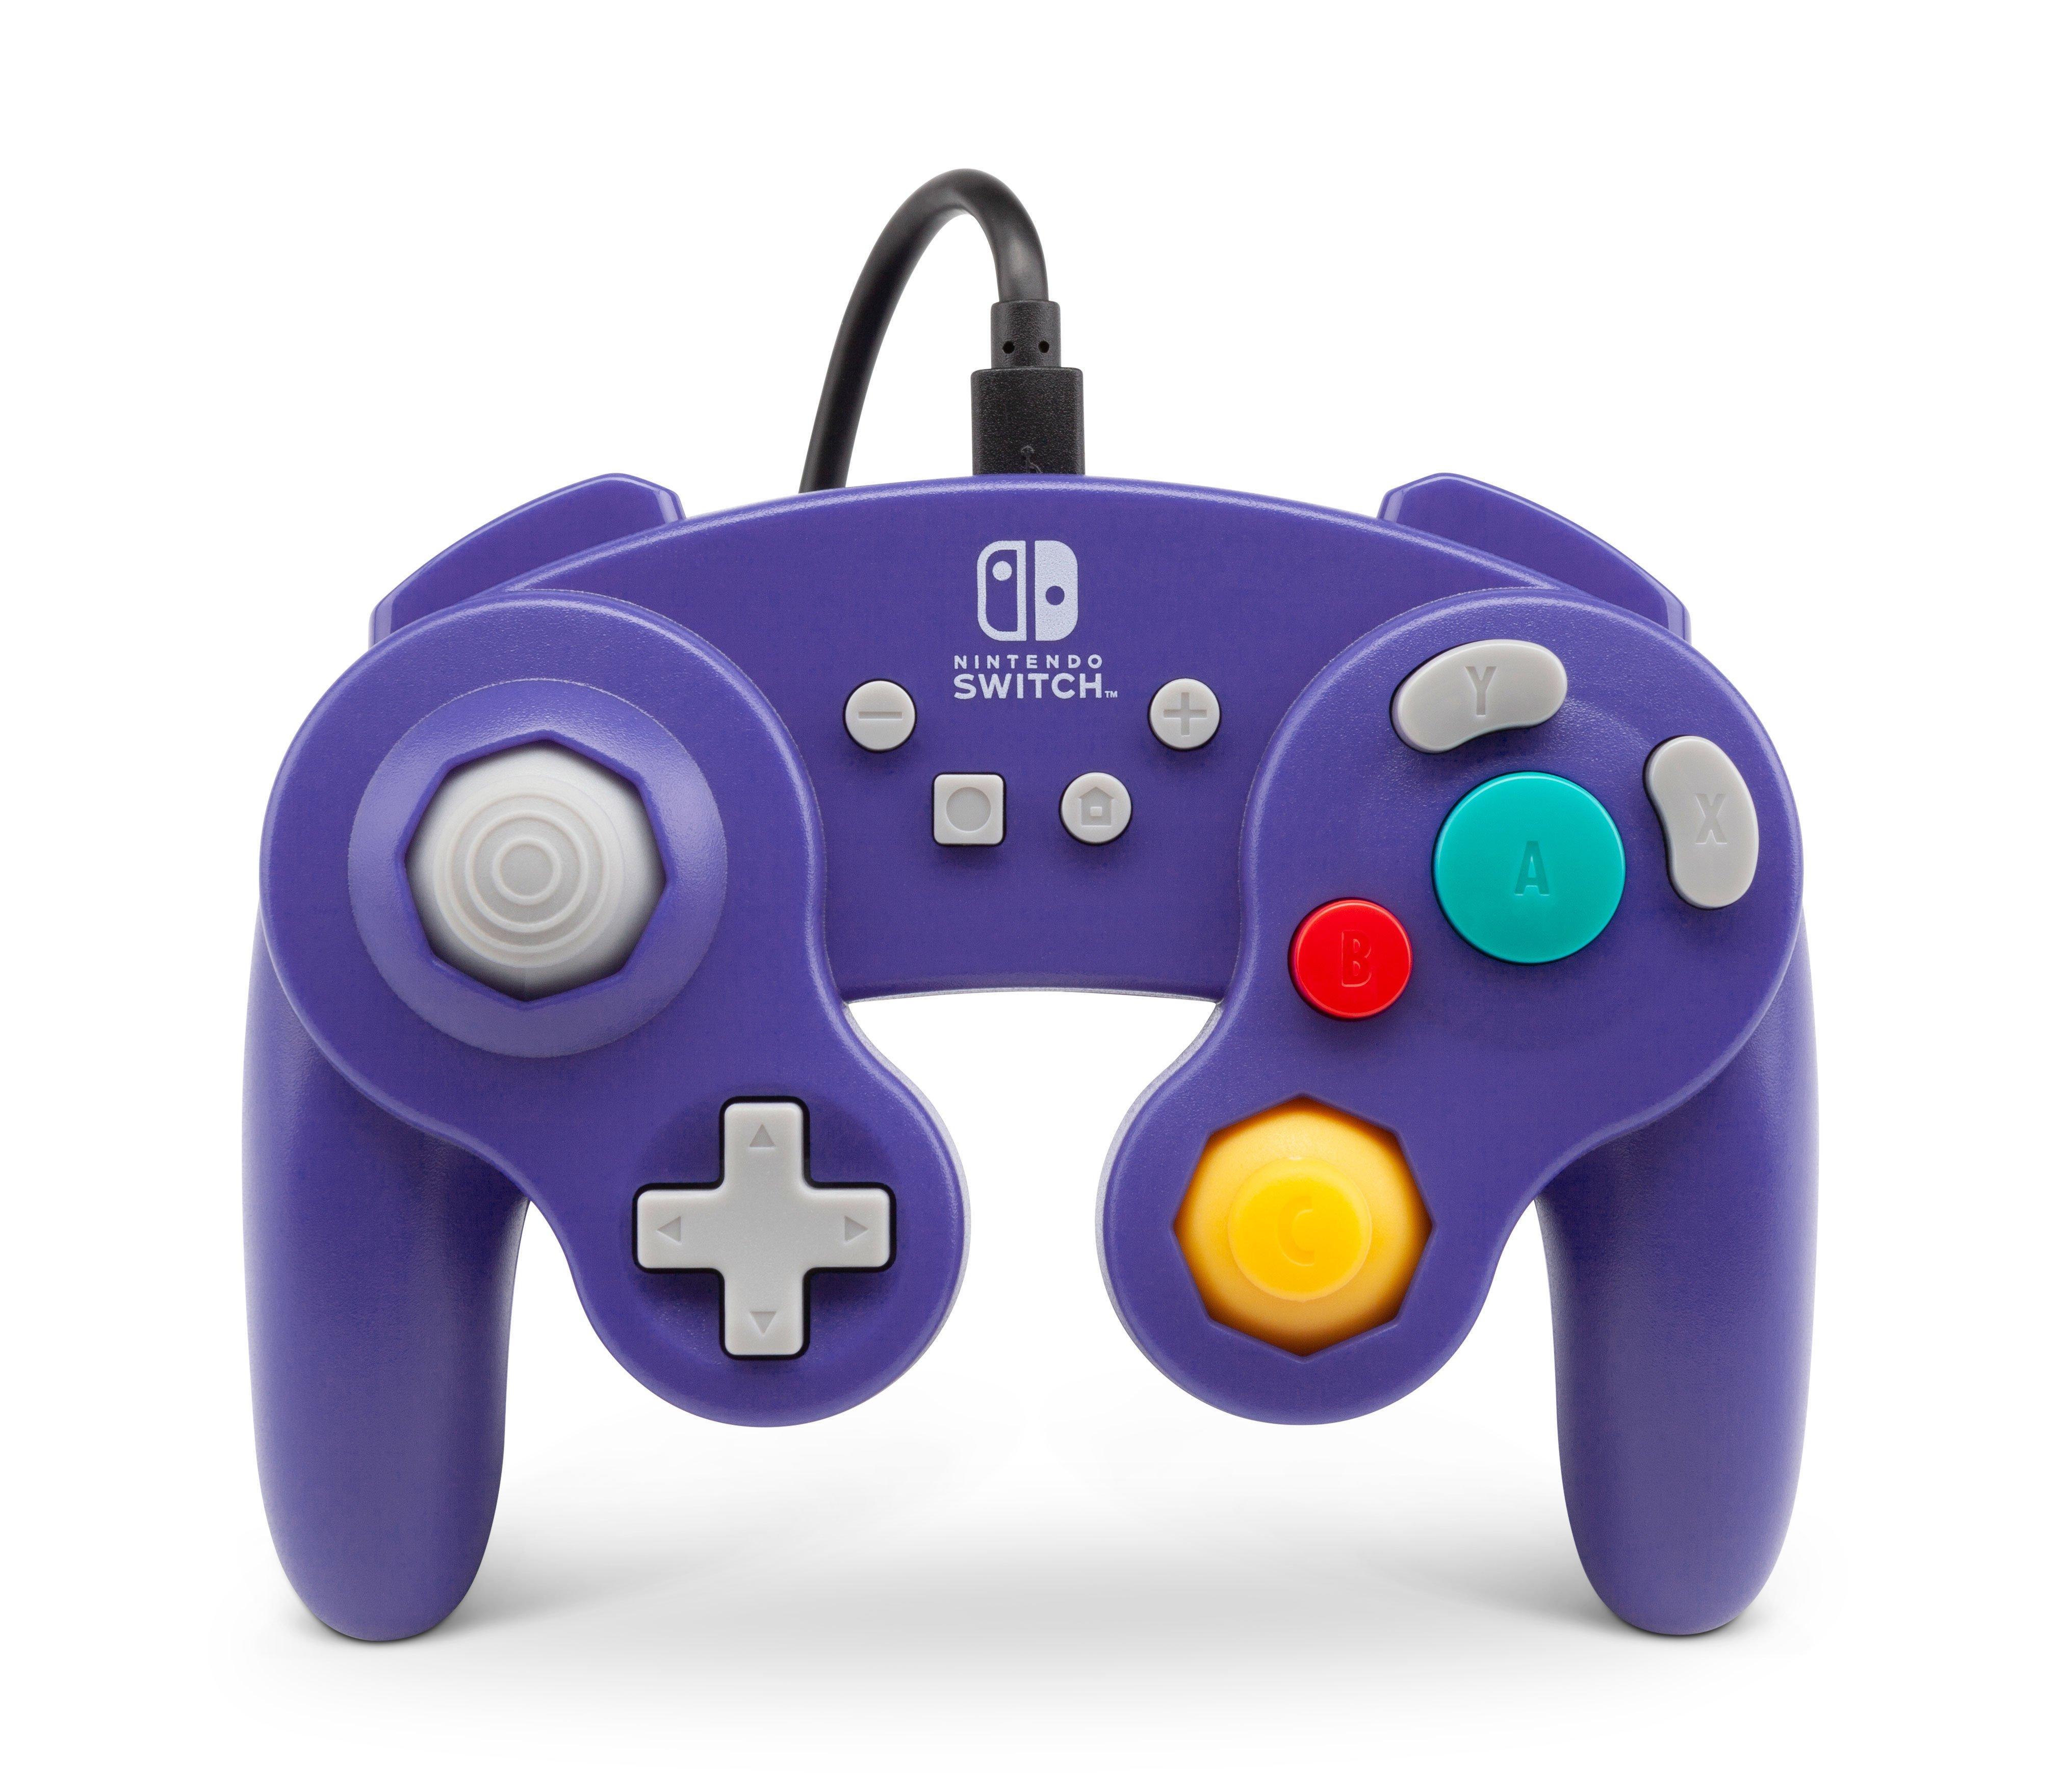 PowerA GameCube Style Wired Controller for Nintendo Switch - Purple |  GameStop